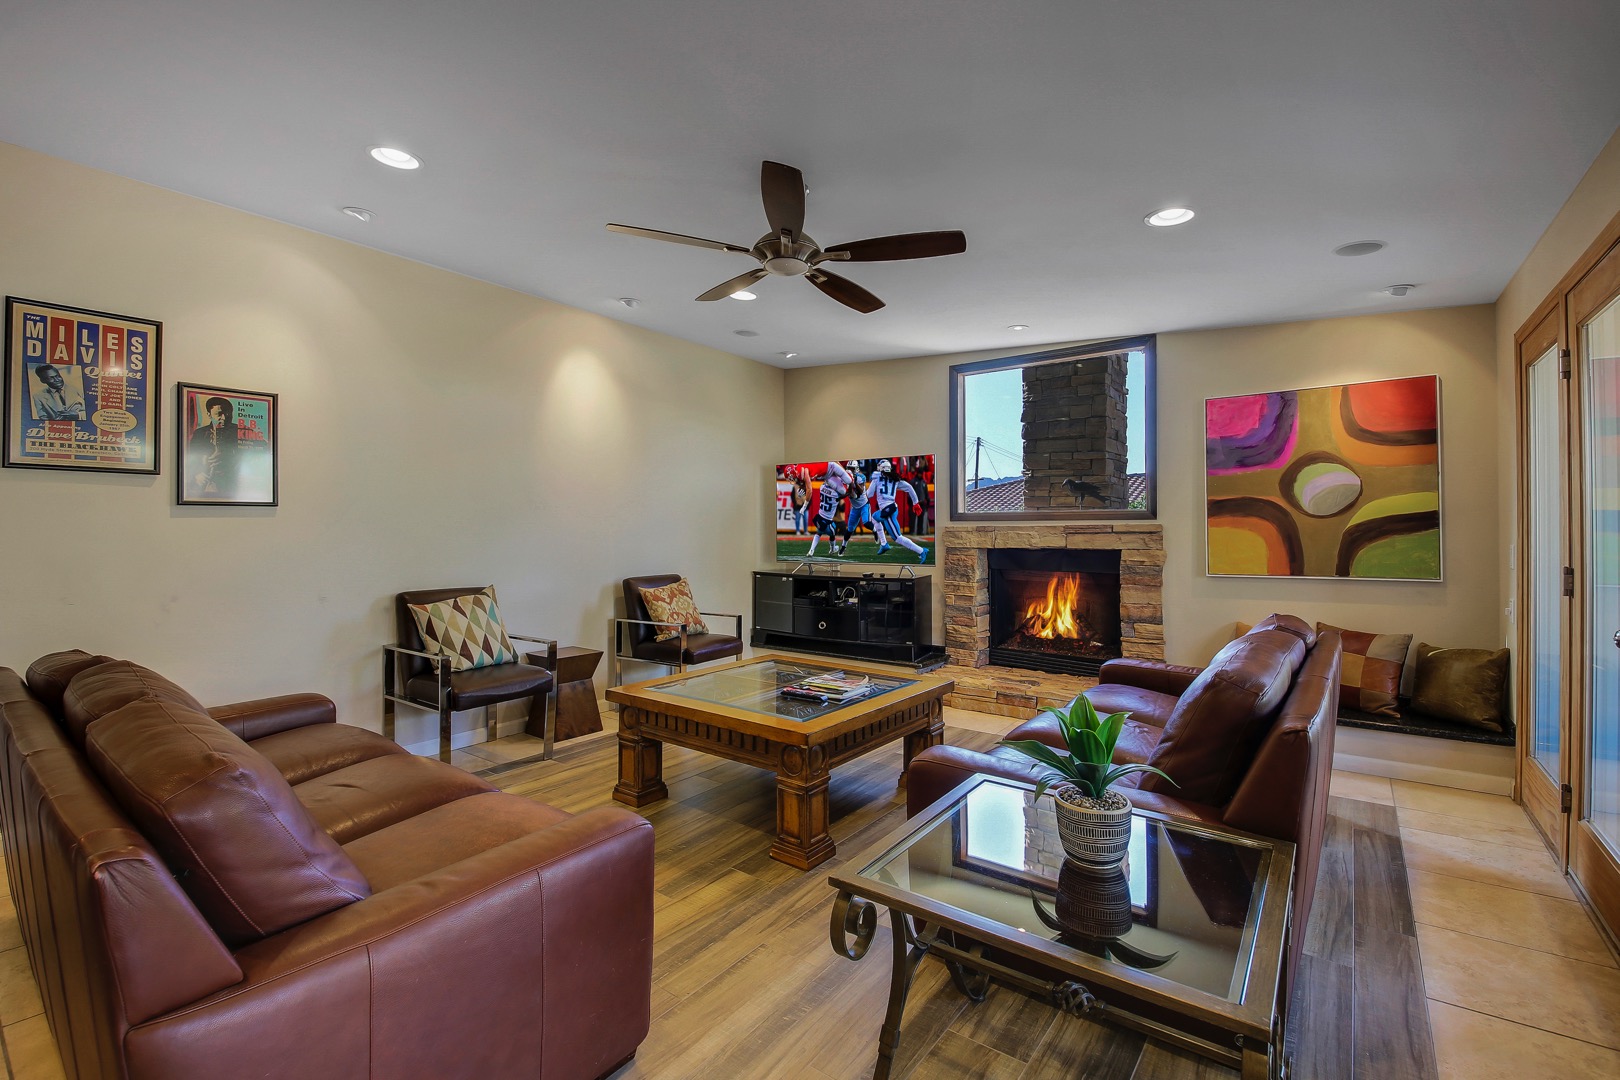 The family room features an HDTV, fireplace and french doors leading to a courtyard patio seating area.